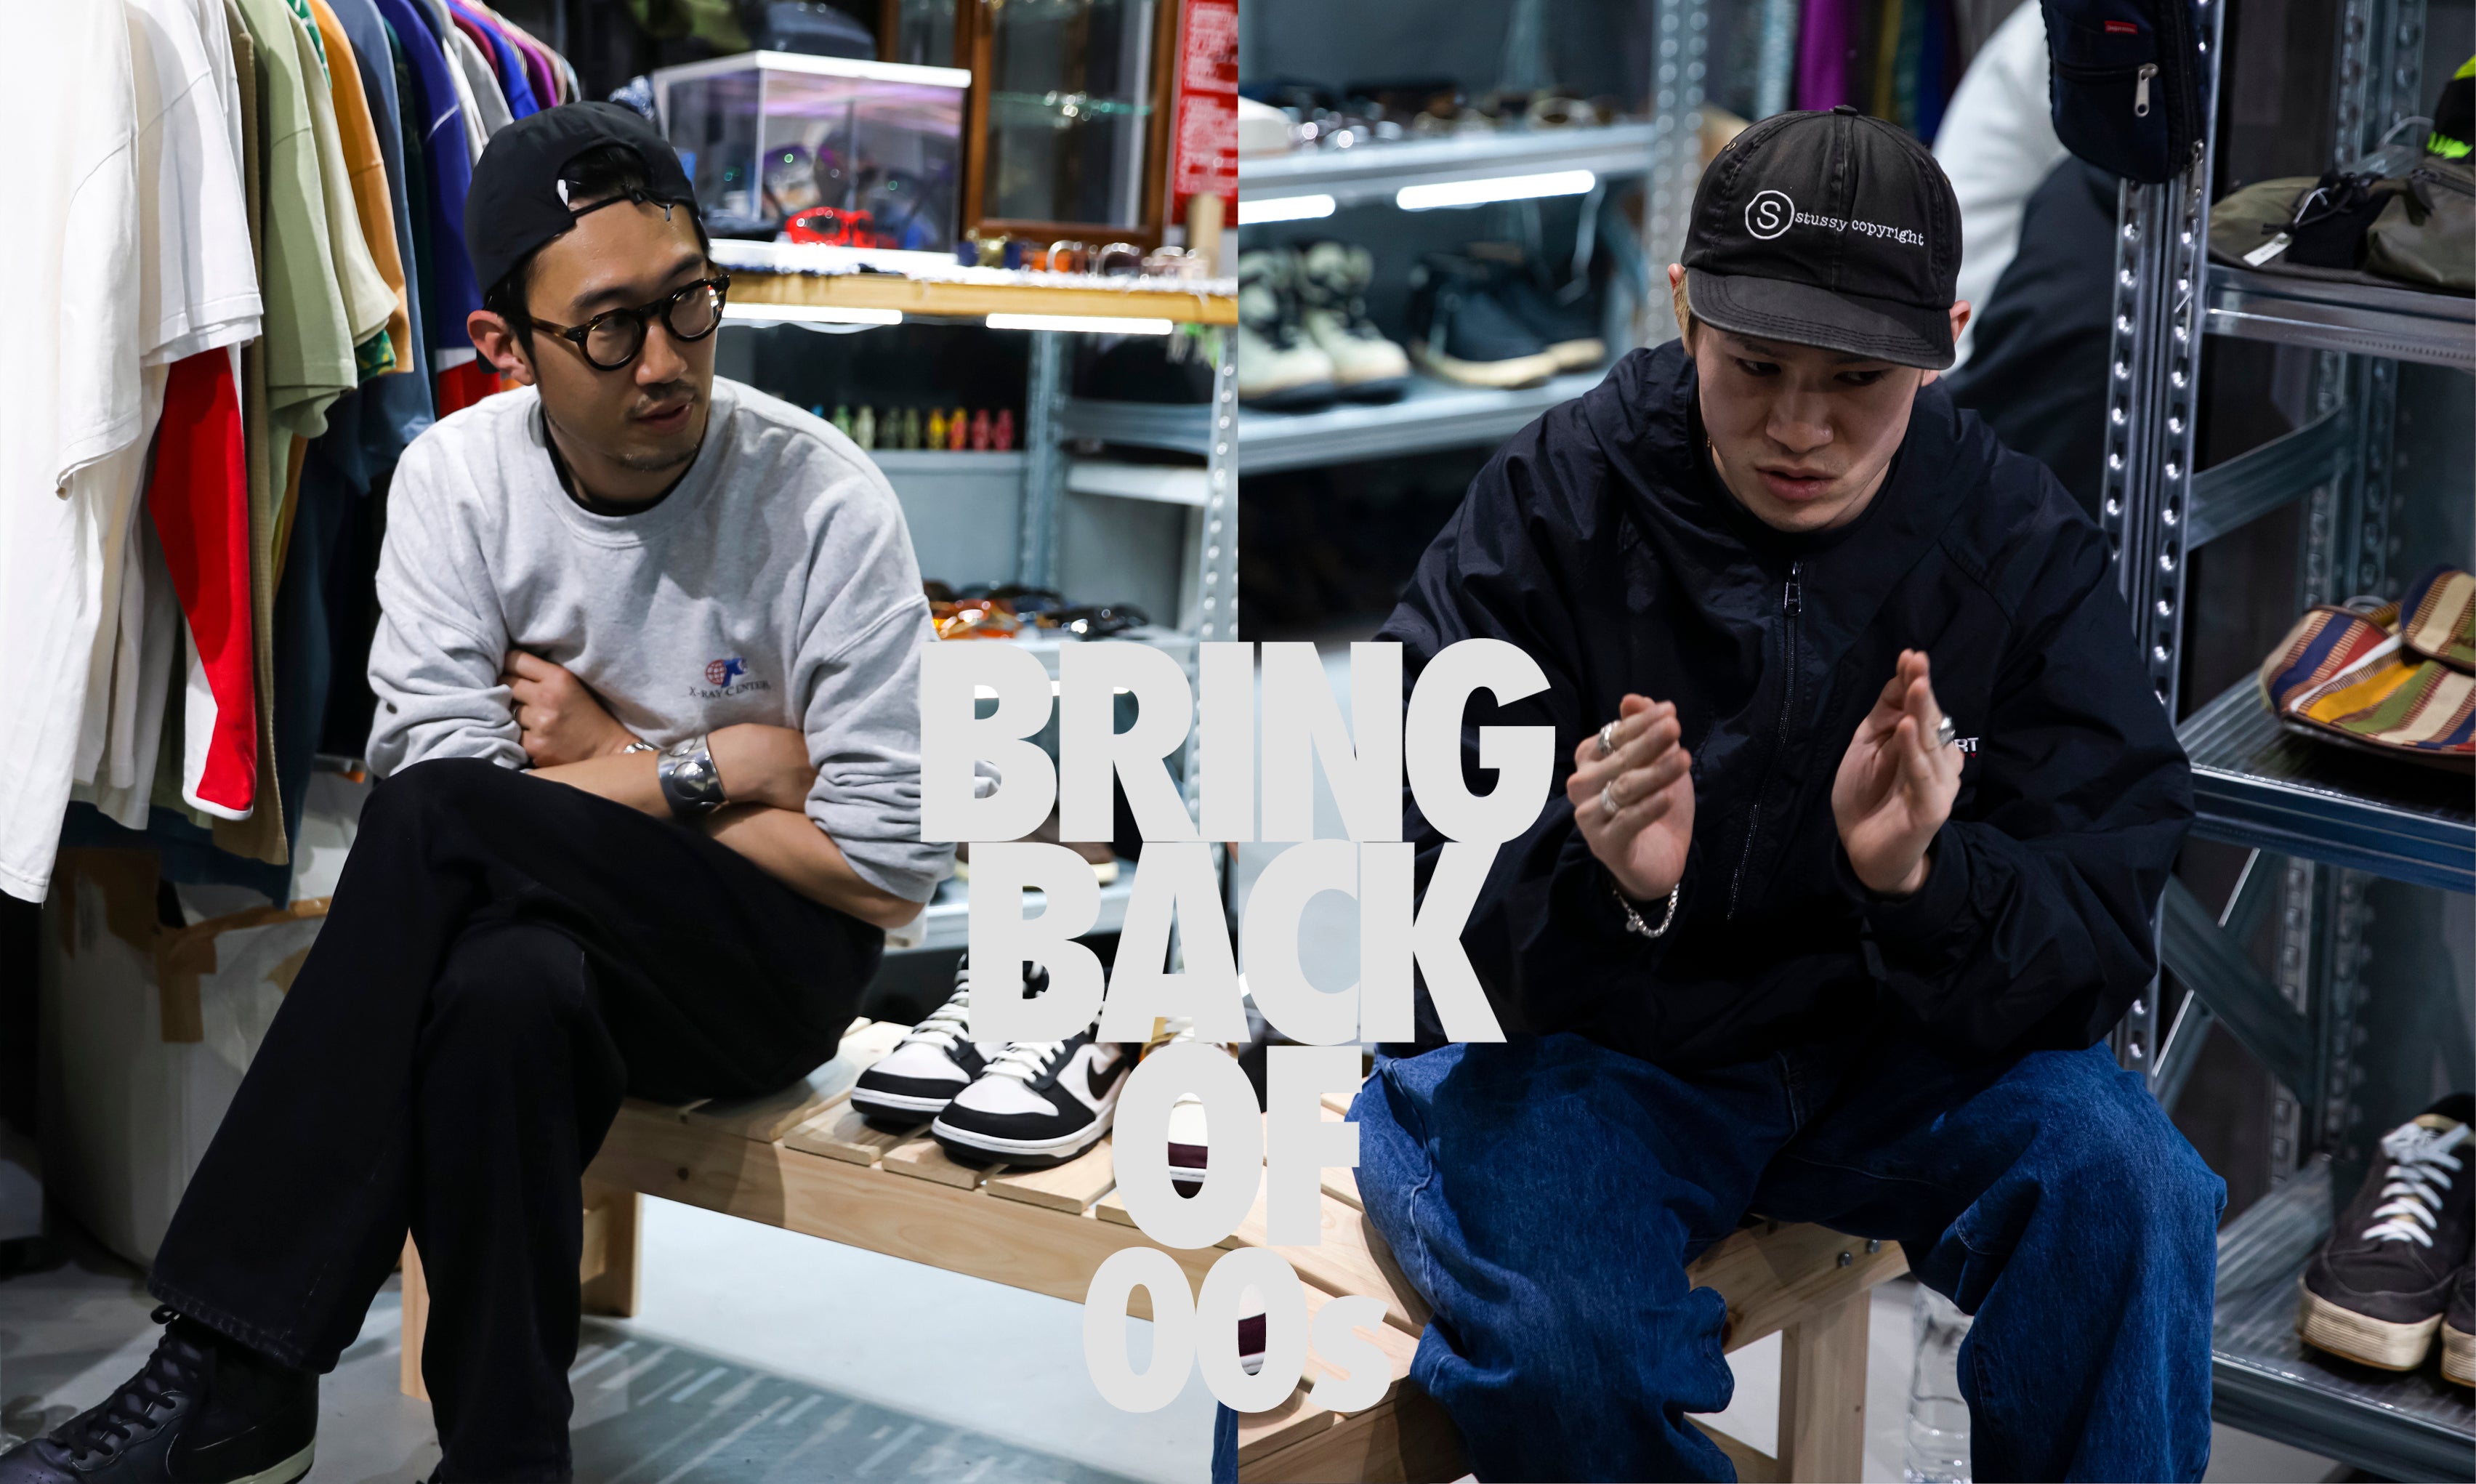 KNOW THE LEDGE / BRING BACK TO 2000s – UNION TOKYO